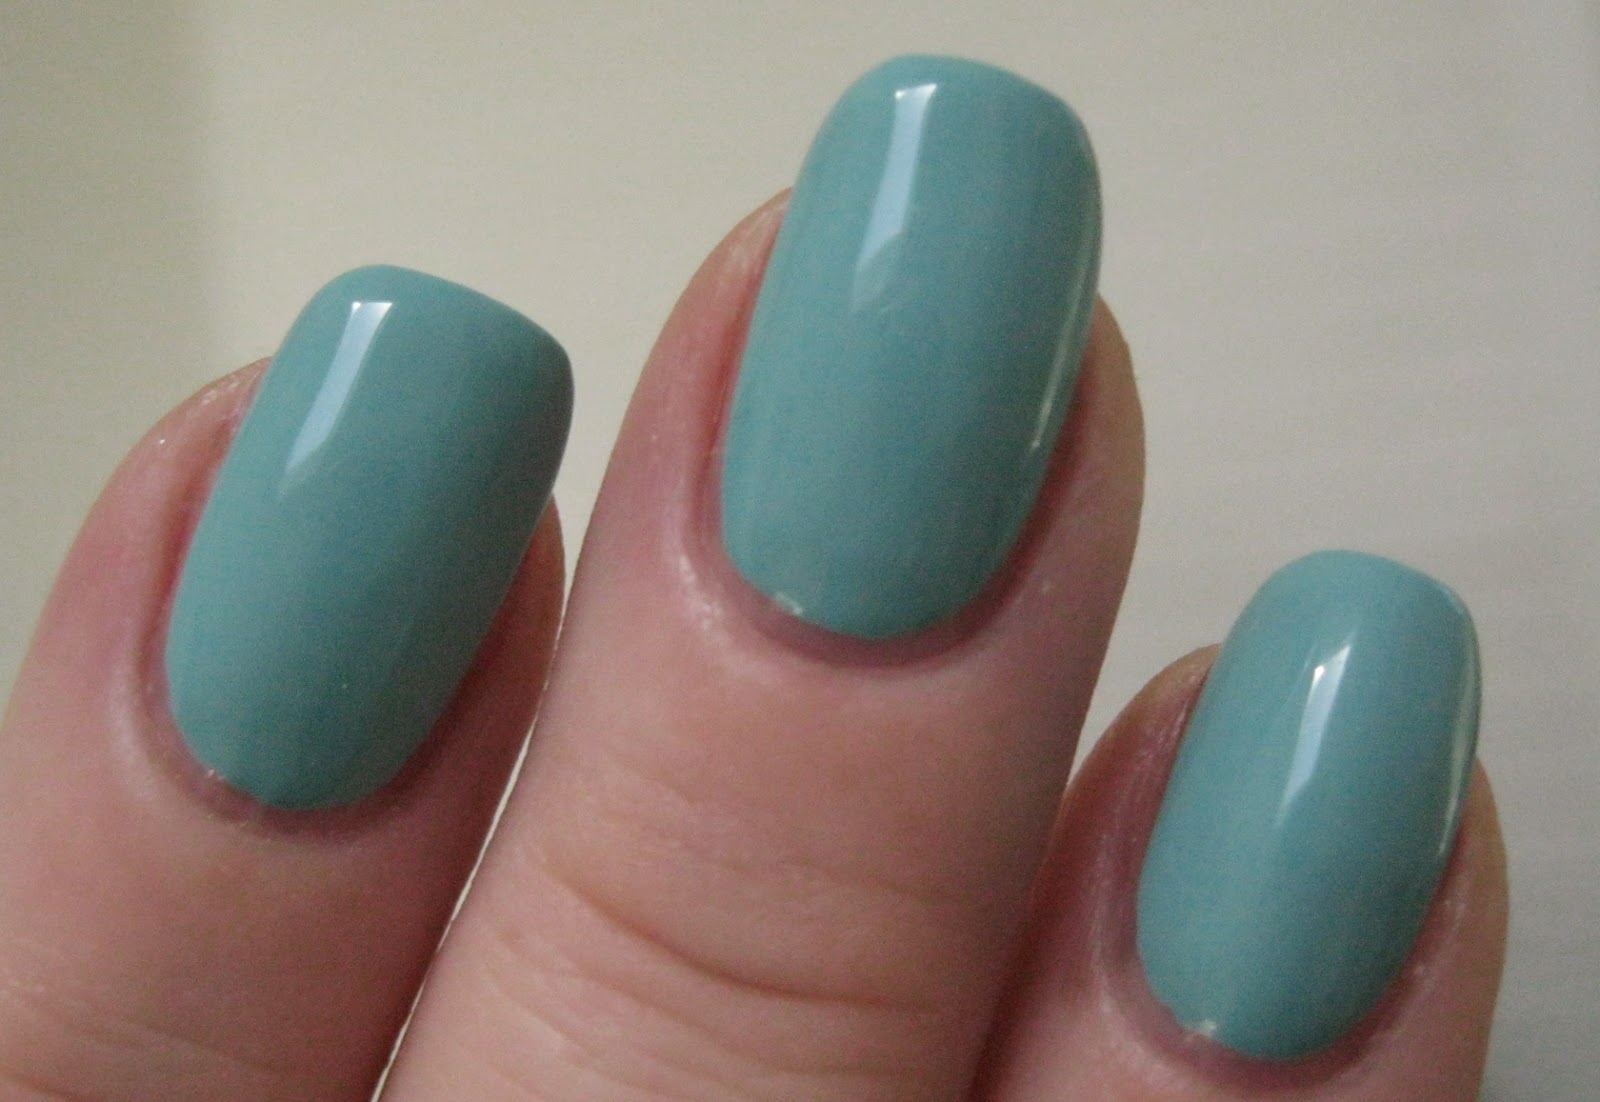 5. China Glaze Nail Lacquer in "For Audrey" - wide 5